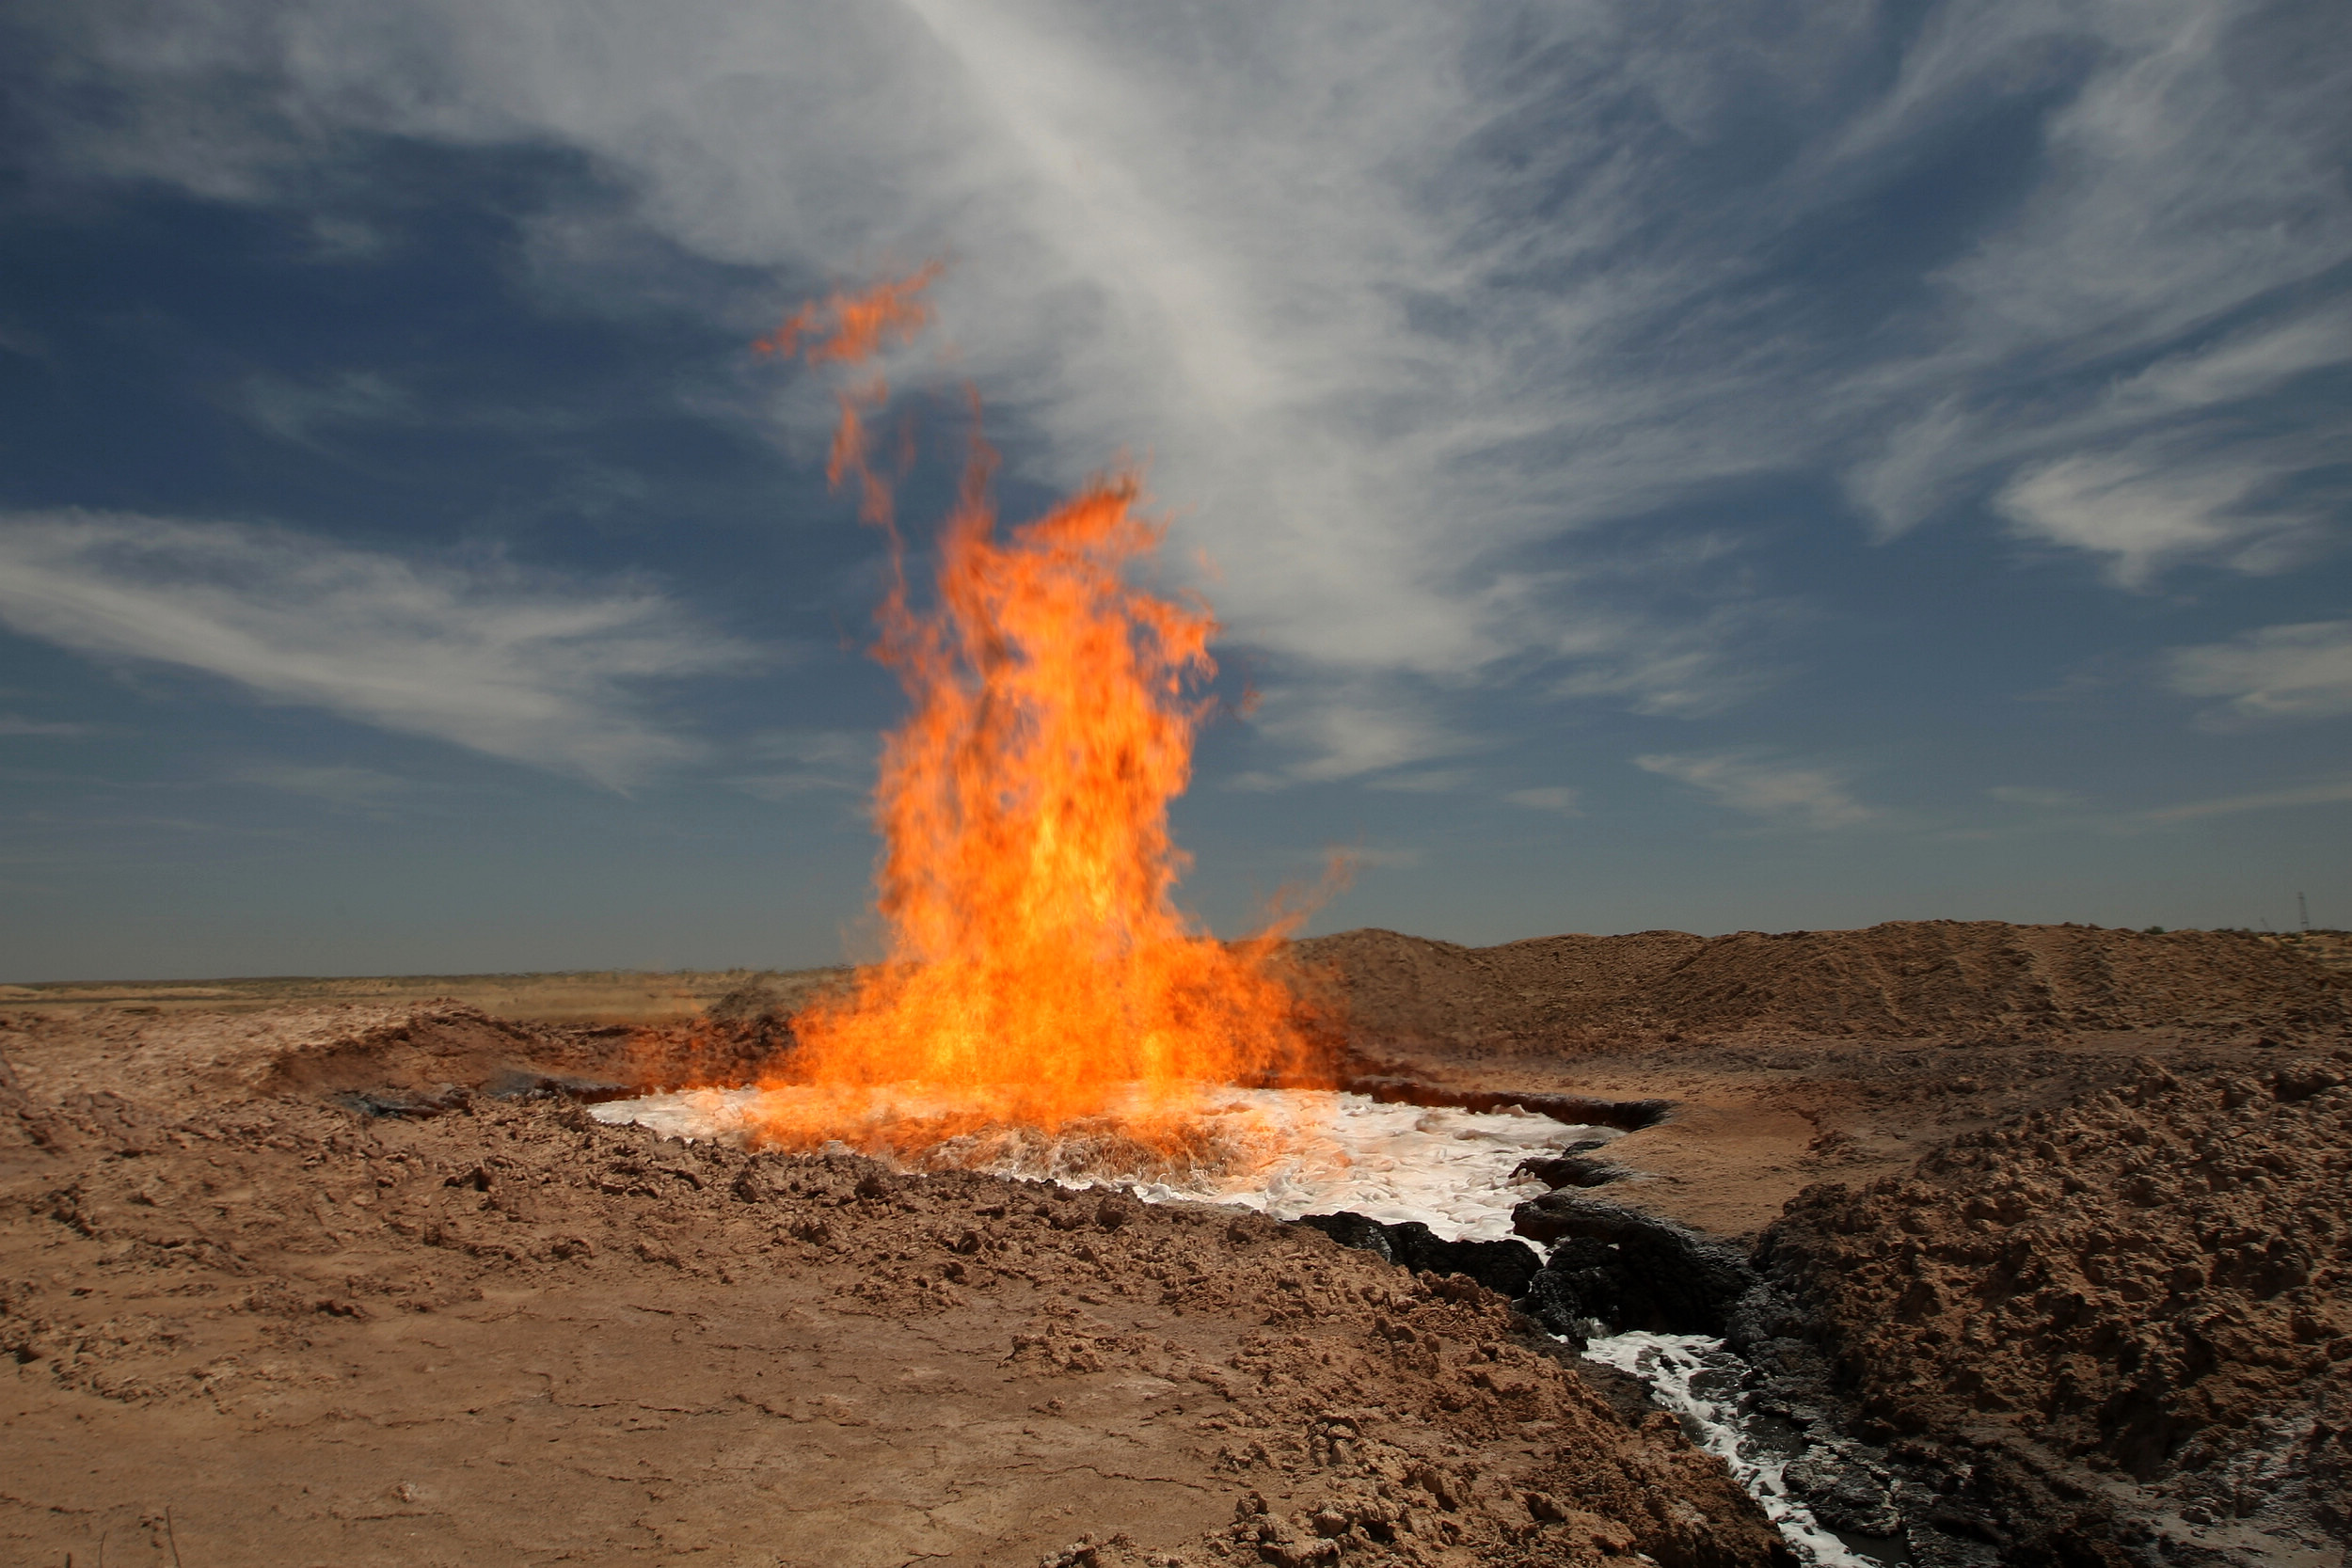 Decade Long Fire Rages At The Little Gate To Hell In Turkmenistan